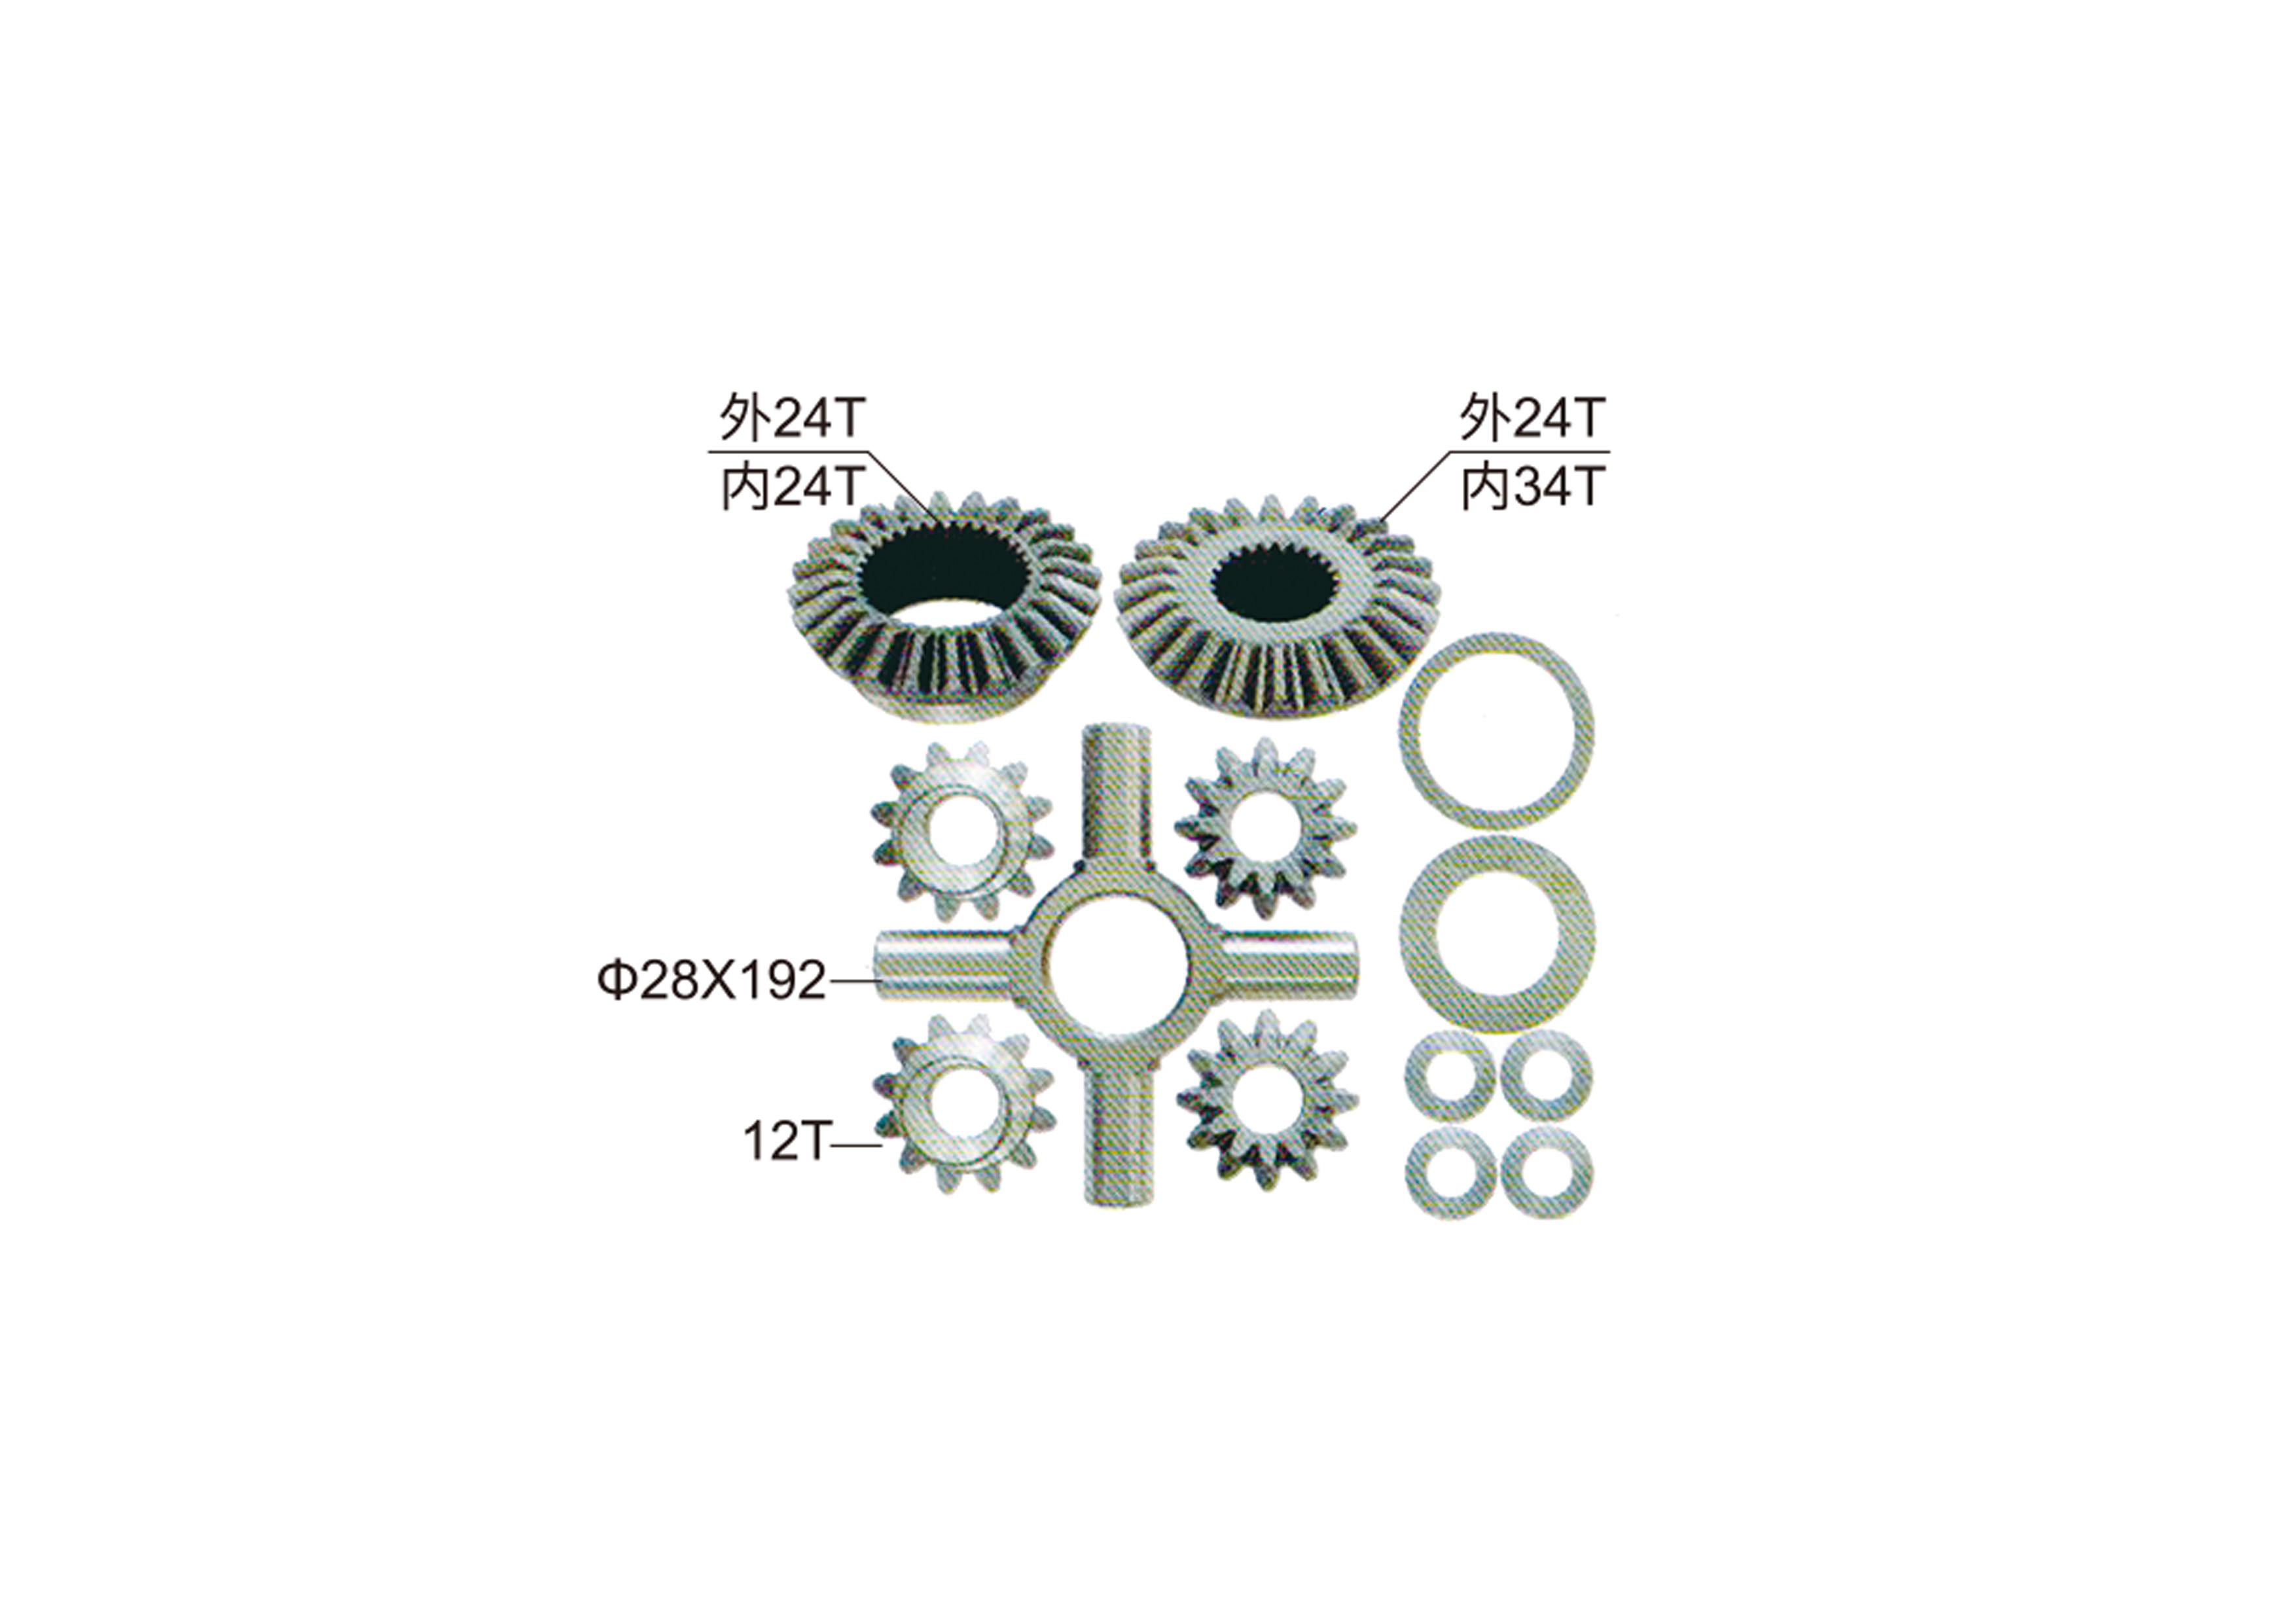 Differential Spider Gear Kit For Nissan Spider 28x192